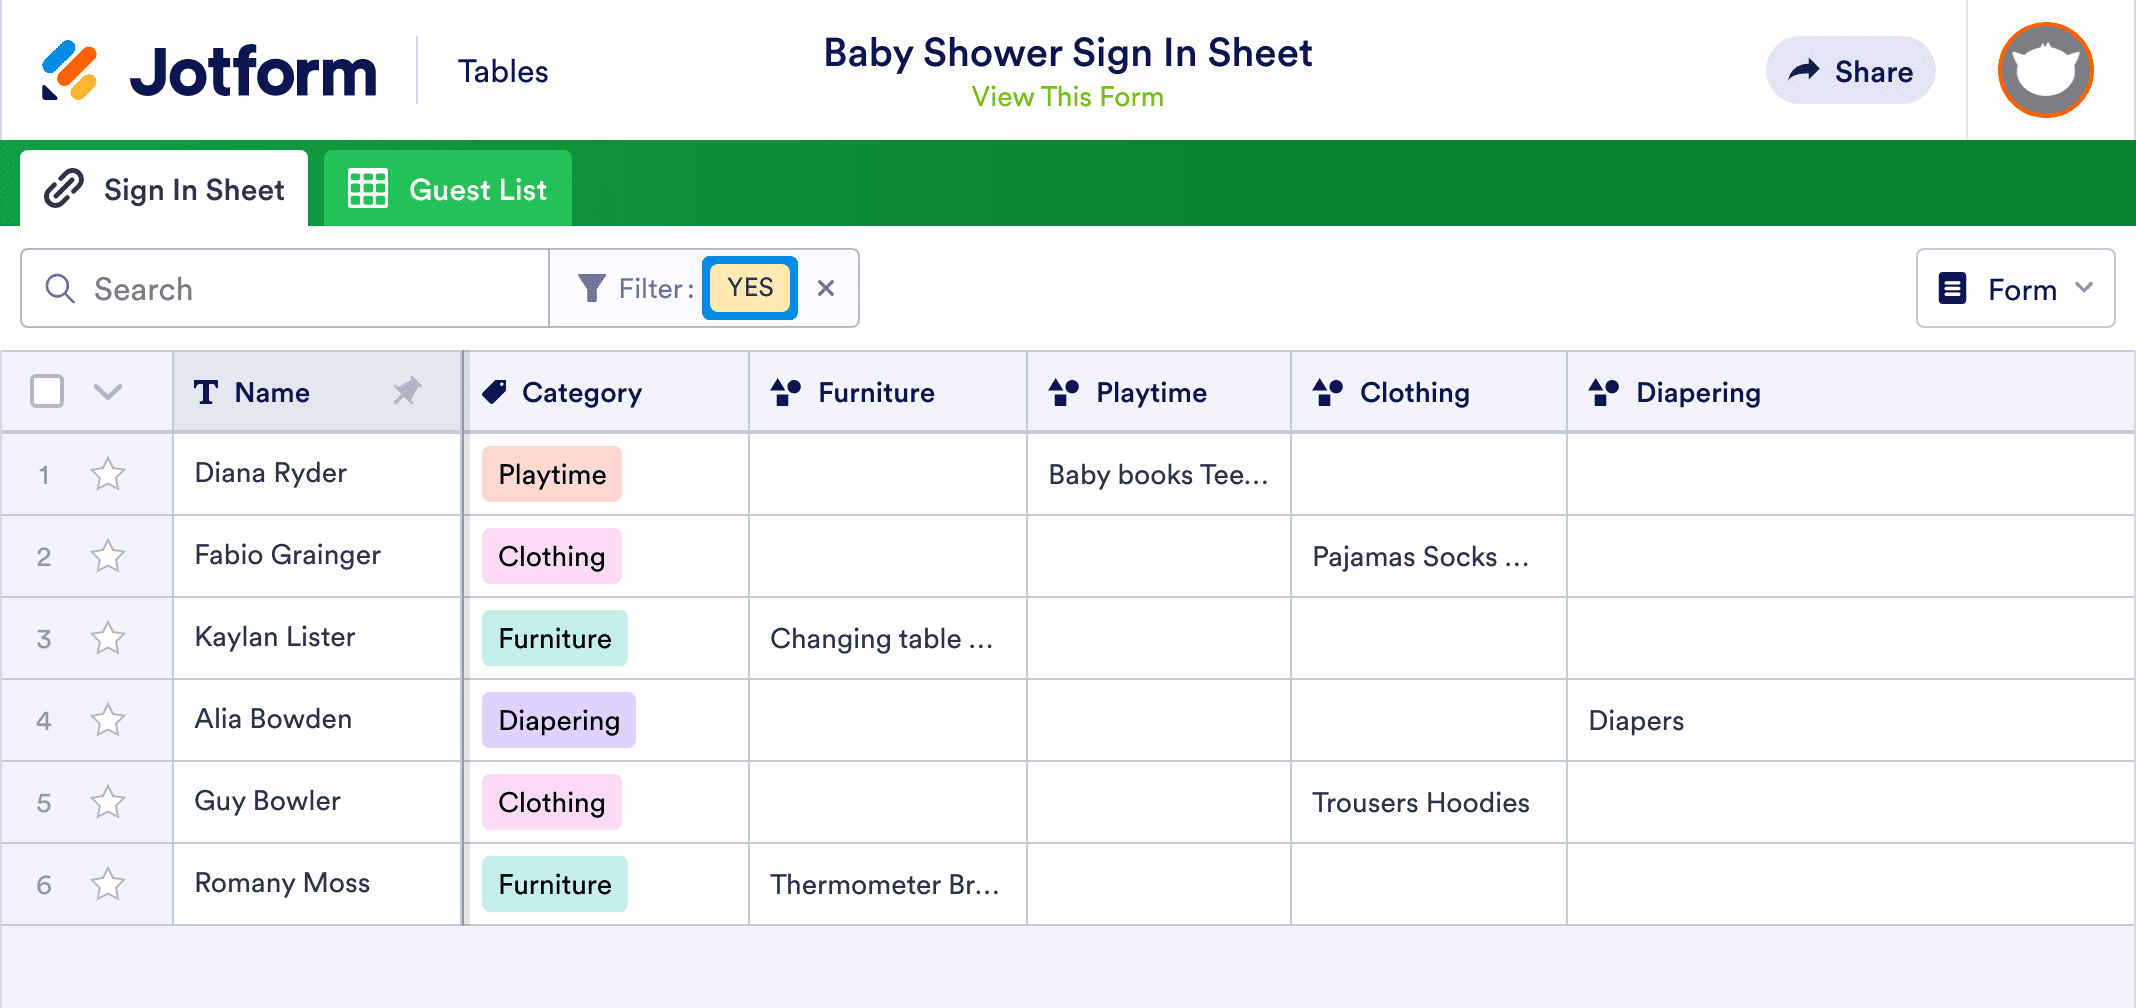 Baby Shower Sign In Sheet Template | Jotform Tables